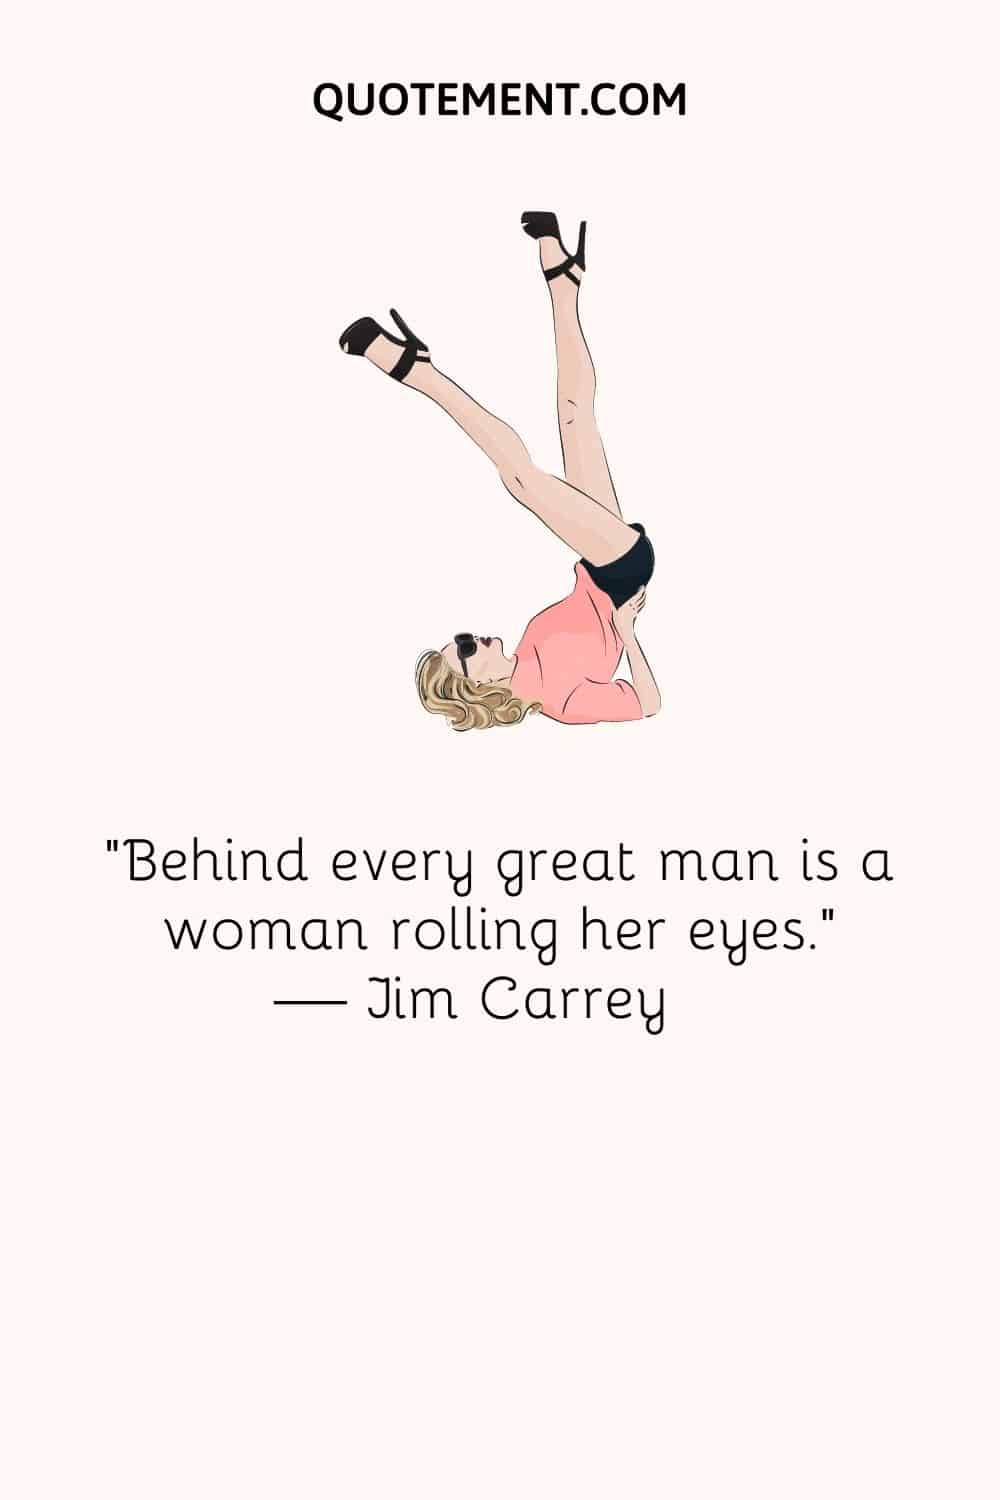 “Behind every great man is a woman rolling her eyes.” — Jim Carrey